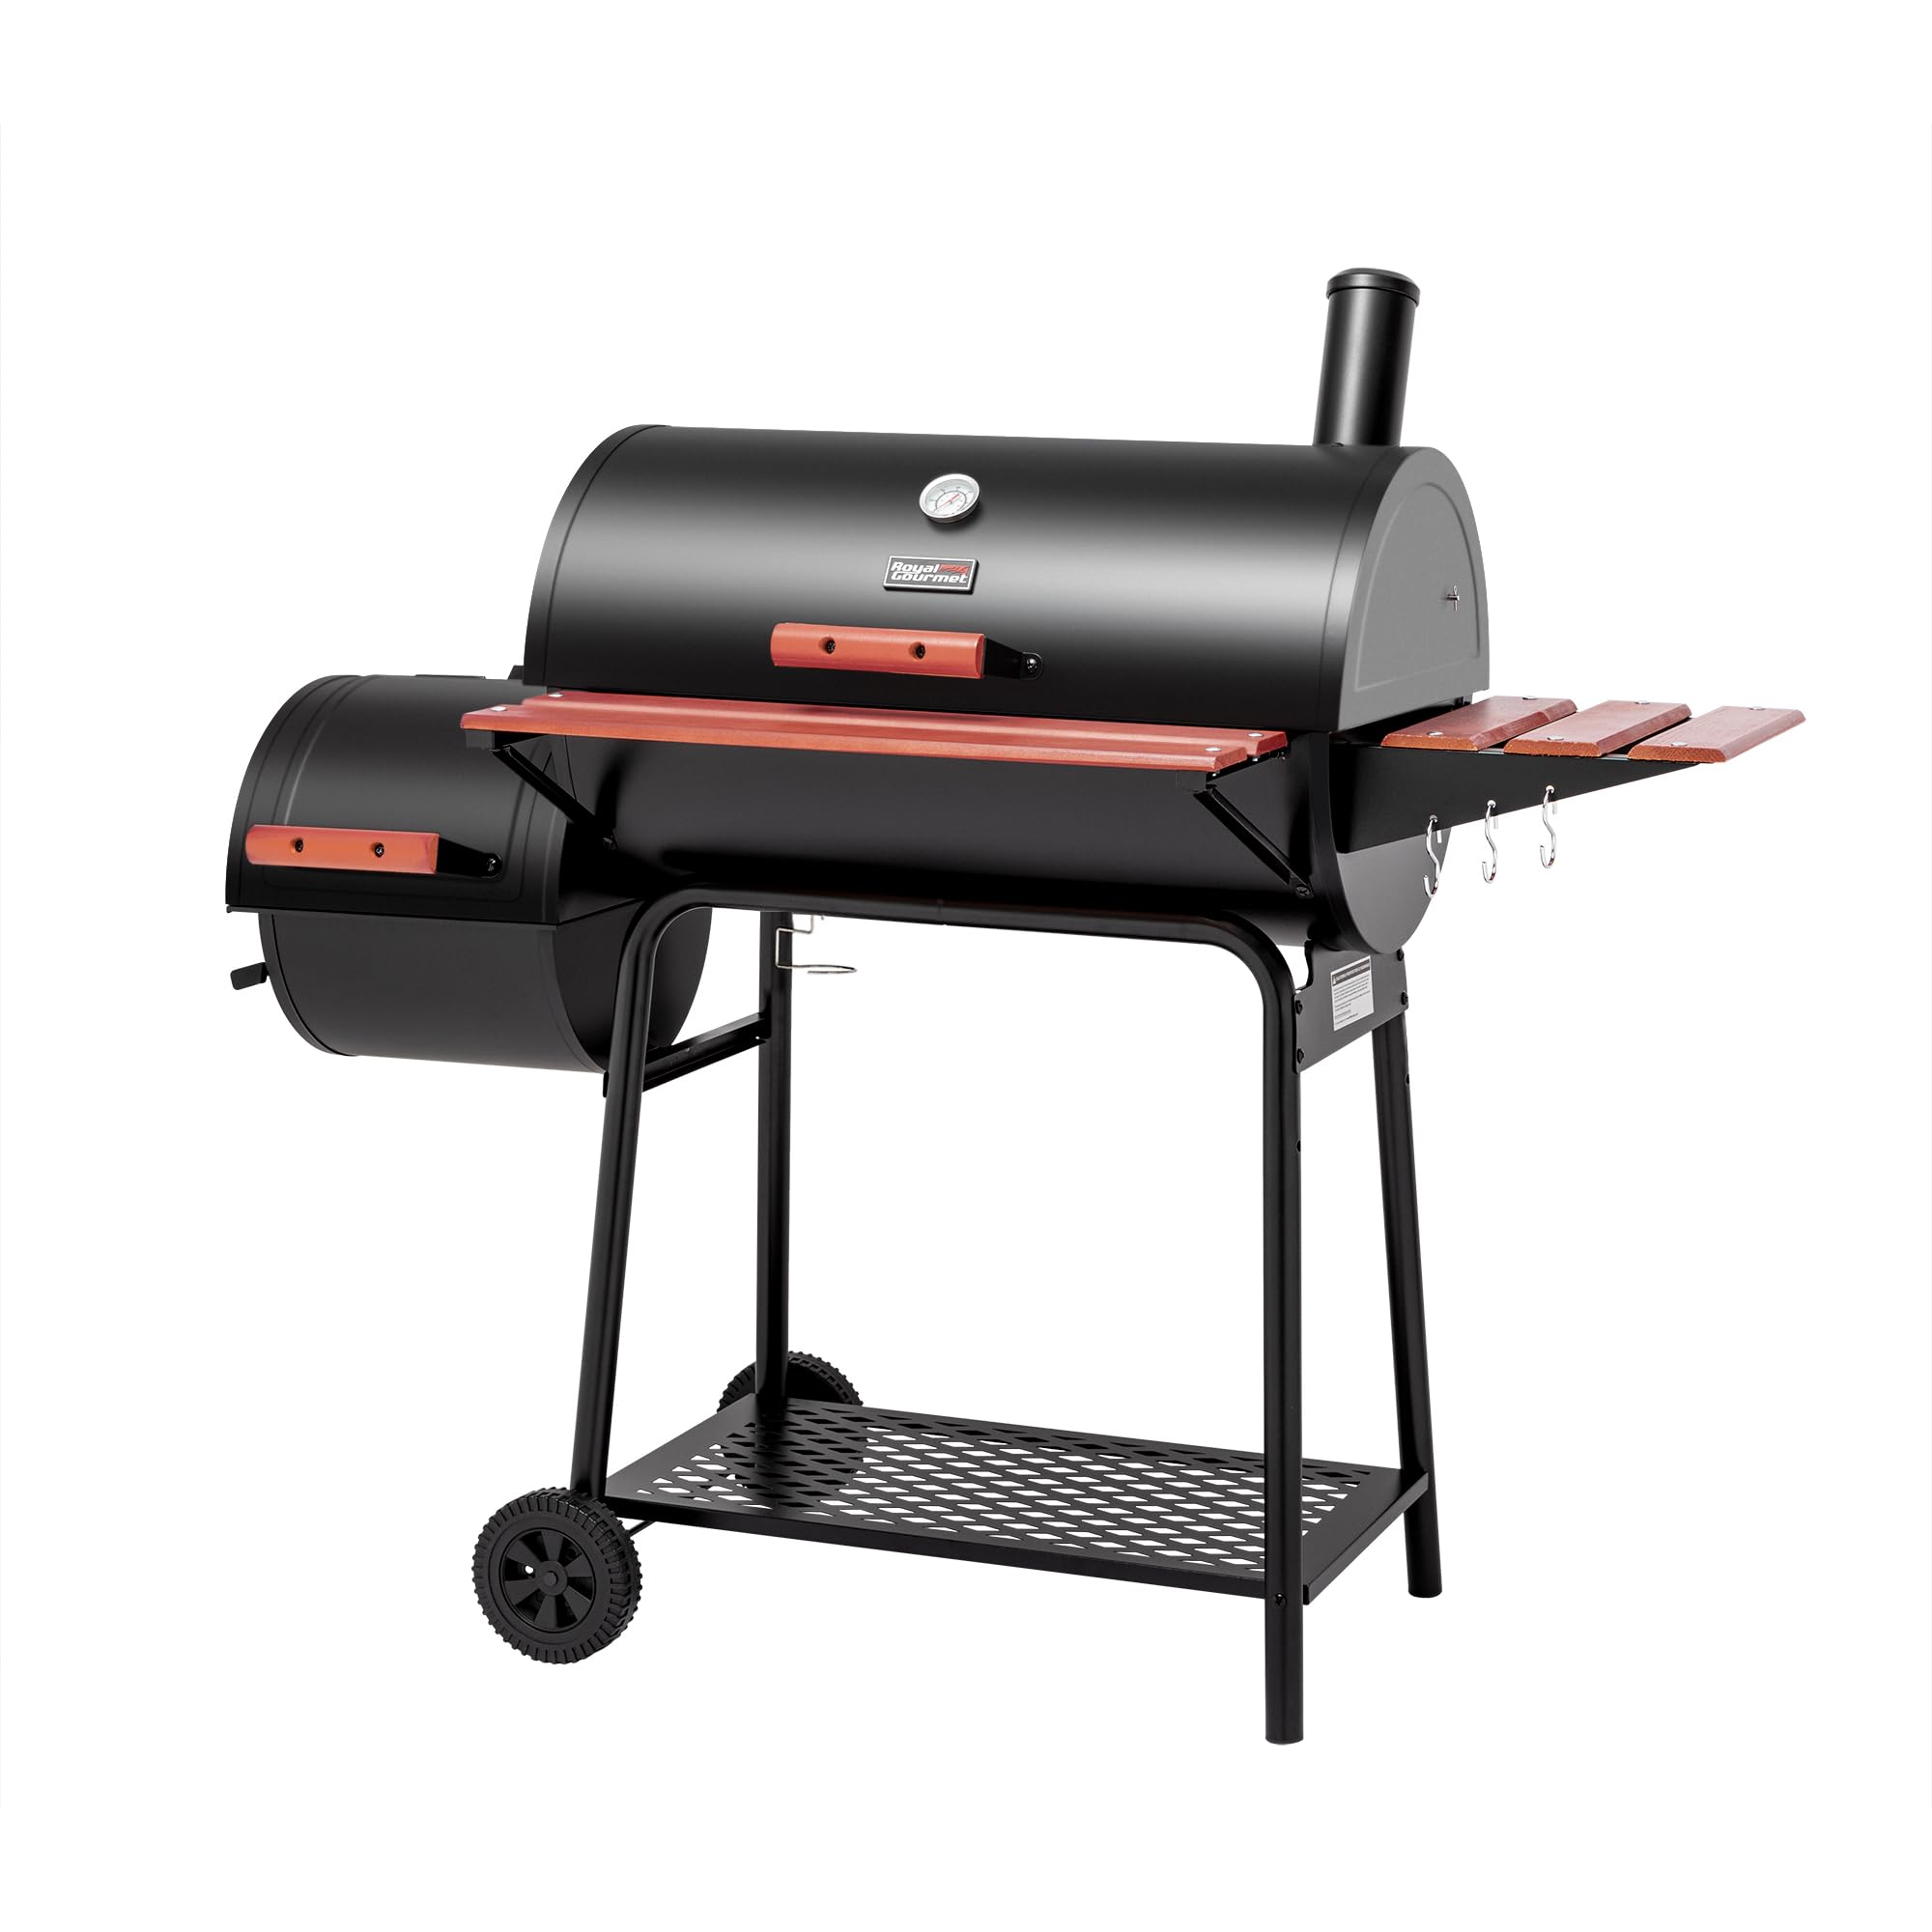 Royal Gourmet CC1830W 30 Barrel Charcoal Grill with Side Table